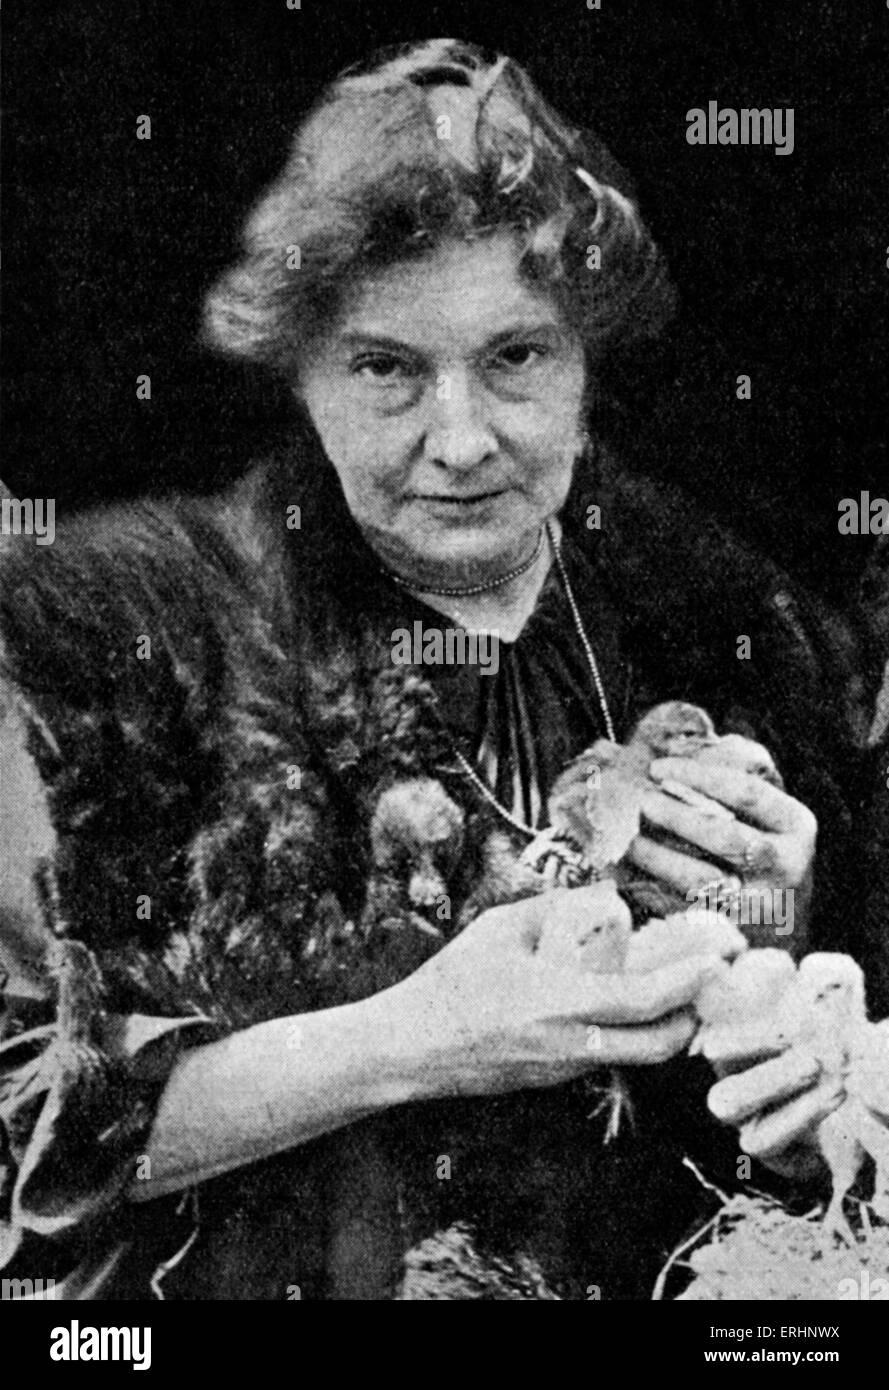 E. Nesbit - holding chicks in her hands, Edith Nesbit. English children's author and poet   15 August 1858 - 4 May 1924 Stock Photo